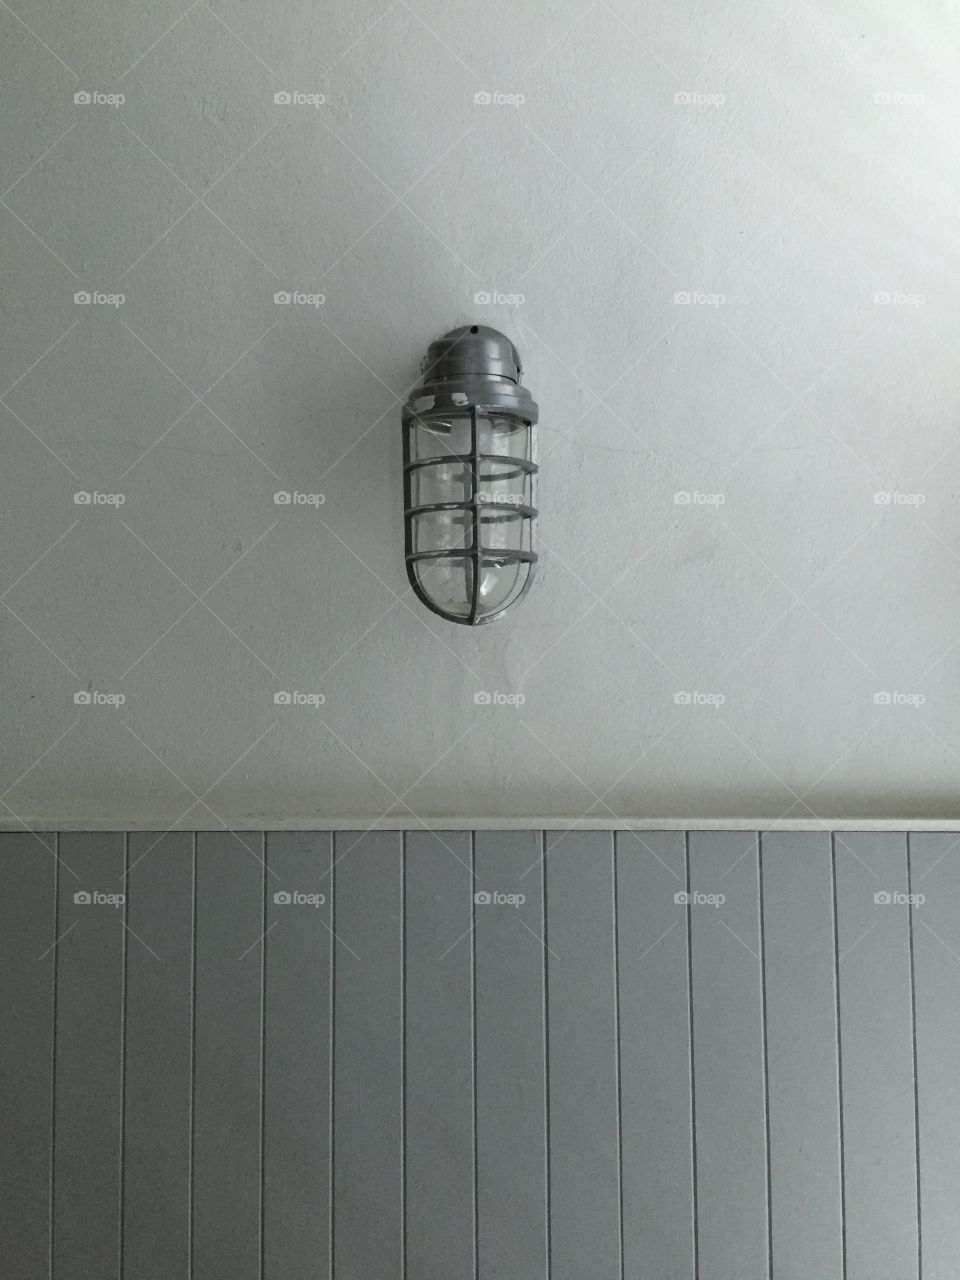 A light bulb protected by a metallic frame on a plain grey wall. The lower part of the wall has a gray wooden pattern.